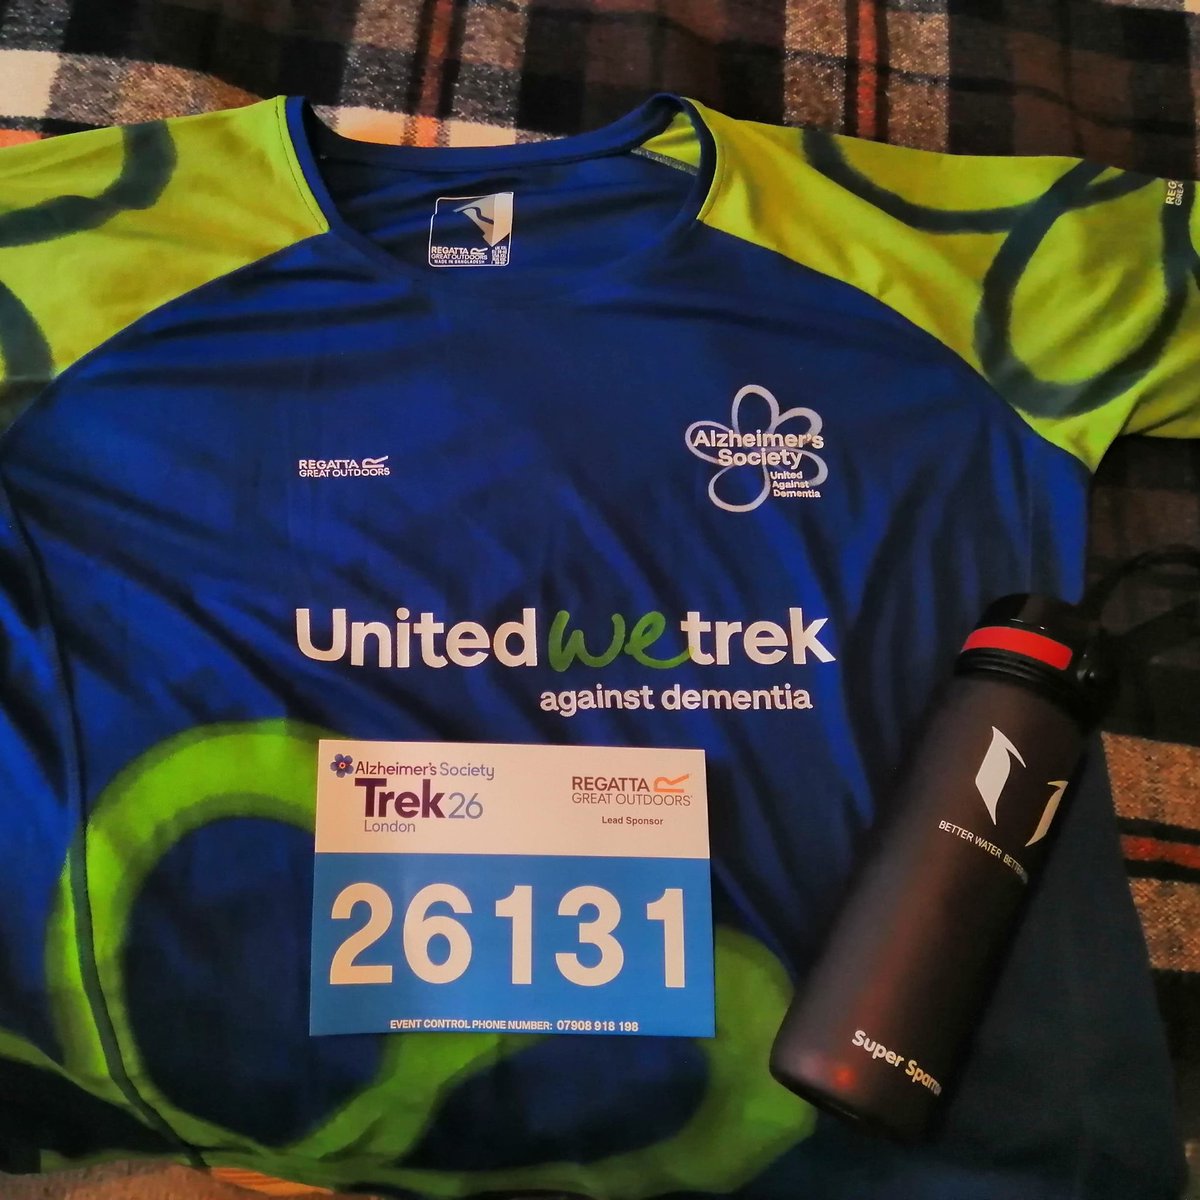 Getting all my bits ready for Saturday's #Trek26 for @alzheimerssoc.

justgiving.com/fundraising/ol…